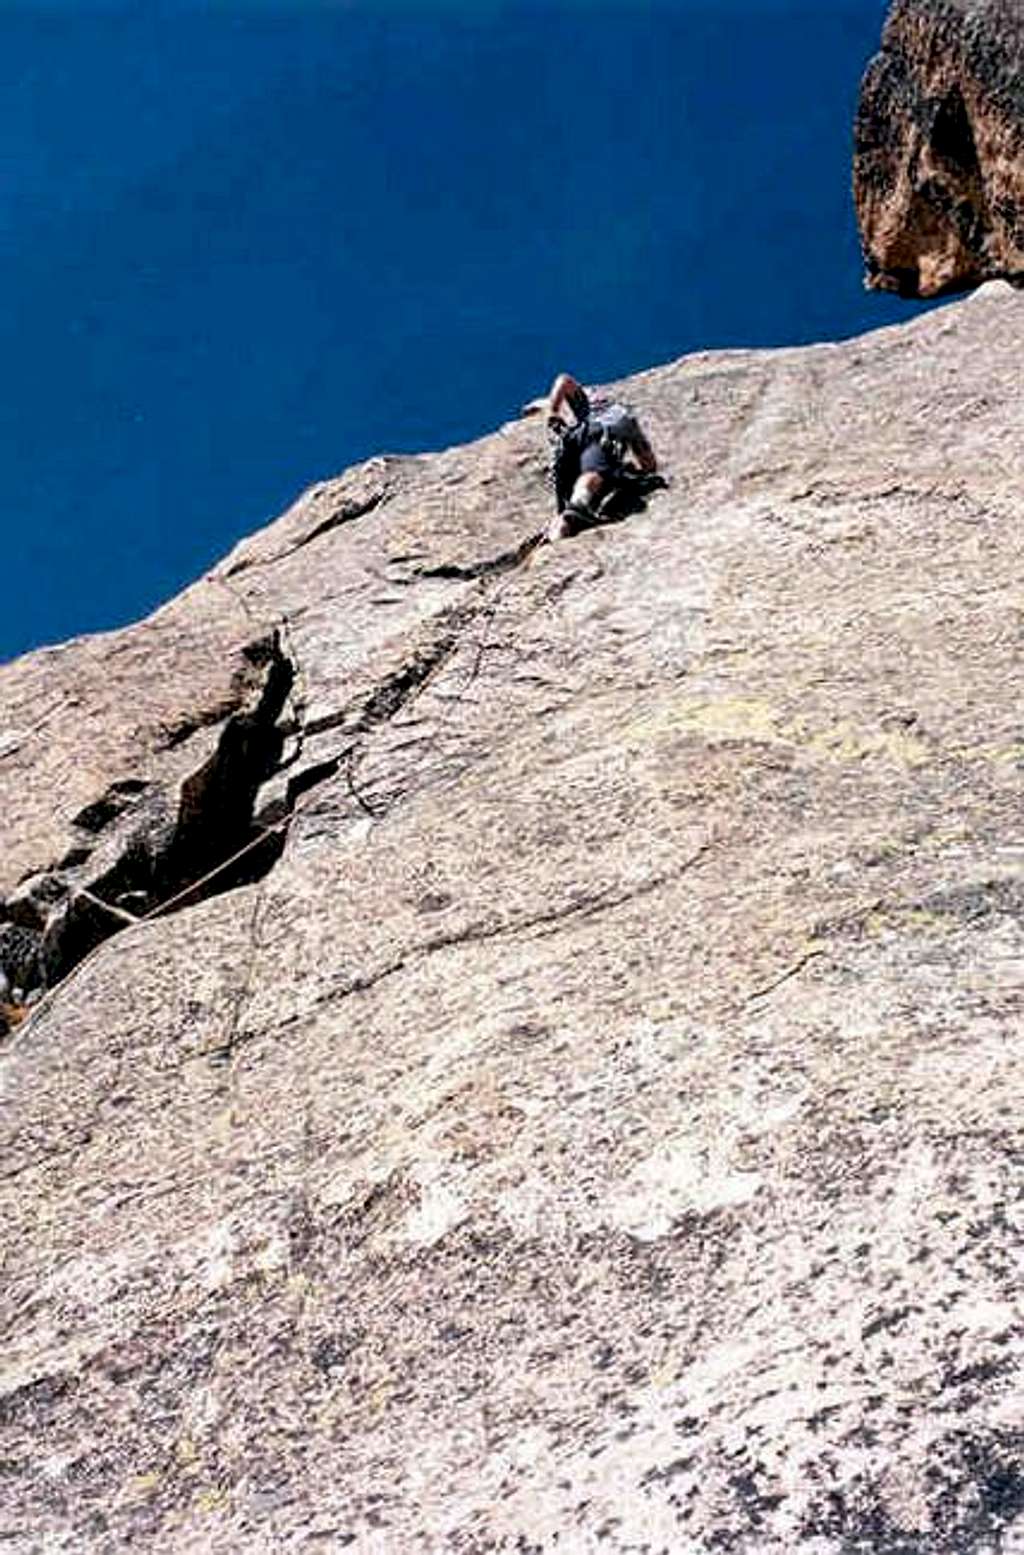 The 5th pitch on Warbonnet